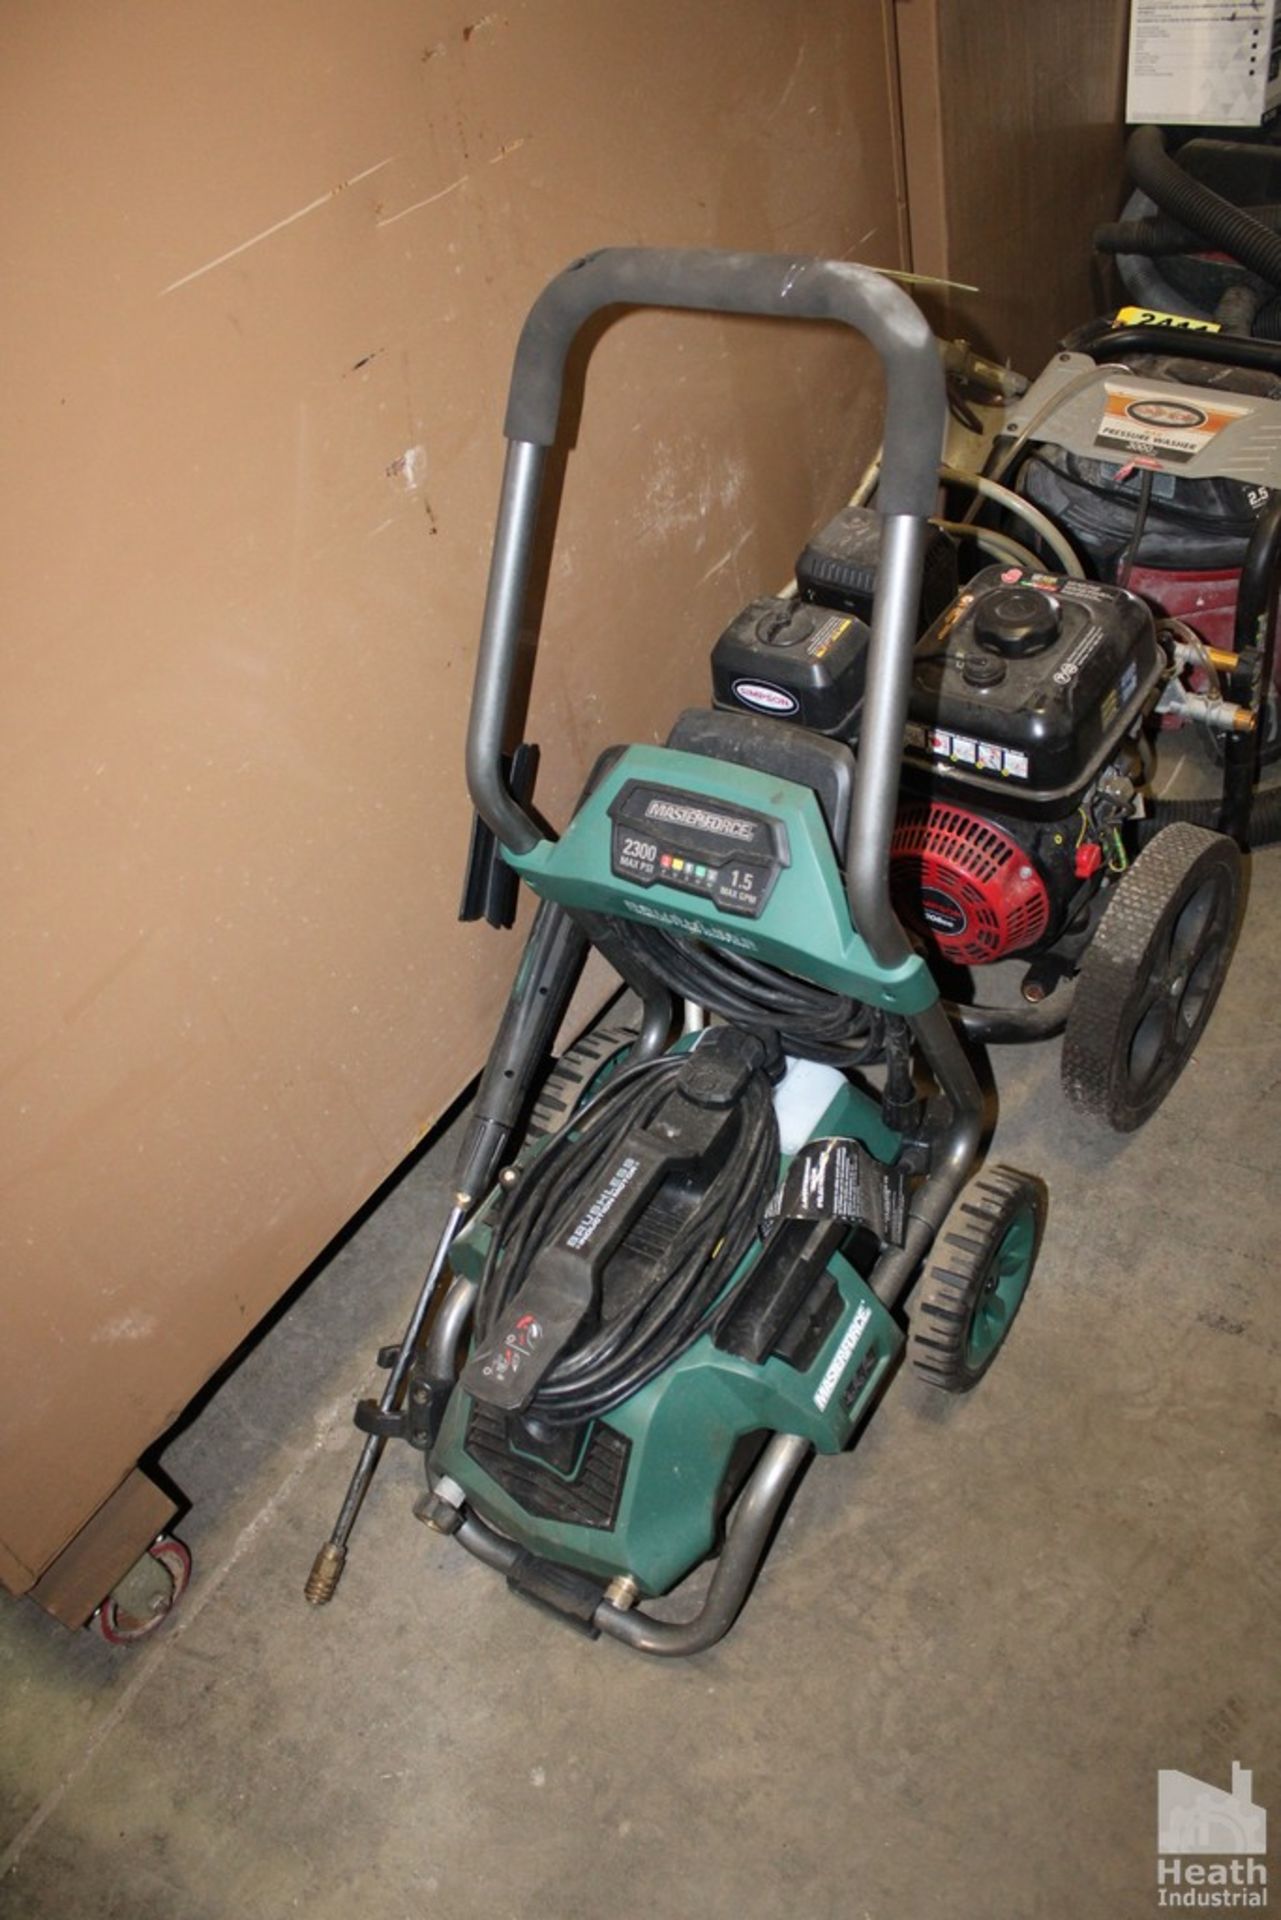 MASTERFORCE ELECTRIC PRESSURE WASHER 2300 PSI